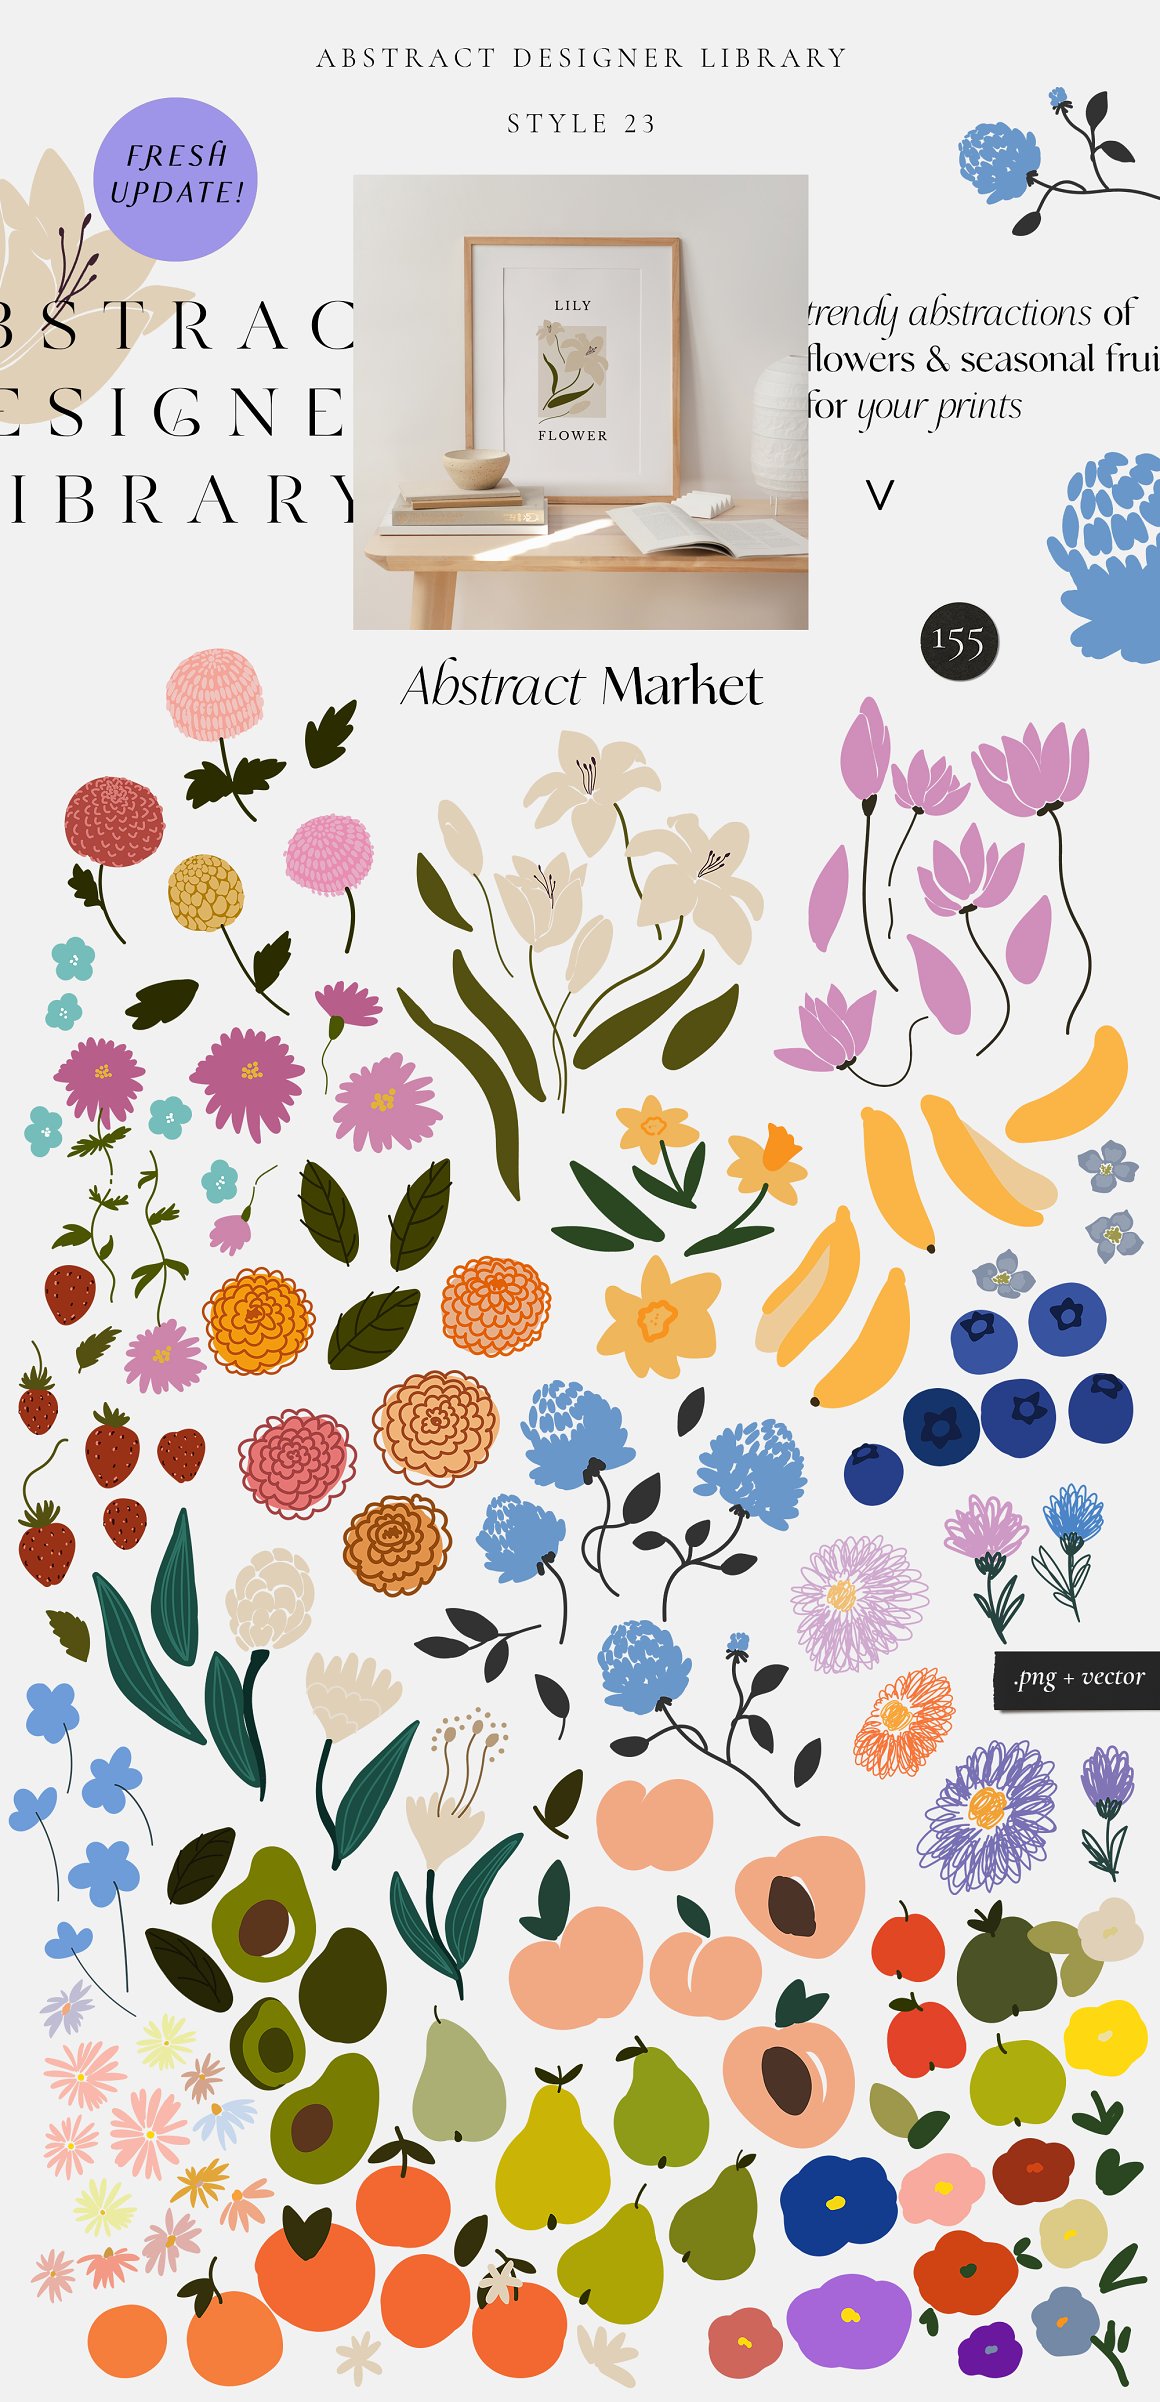 A set of different abstract market on a gray background.